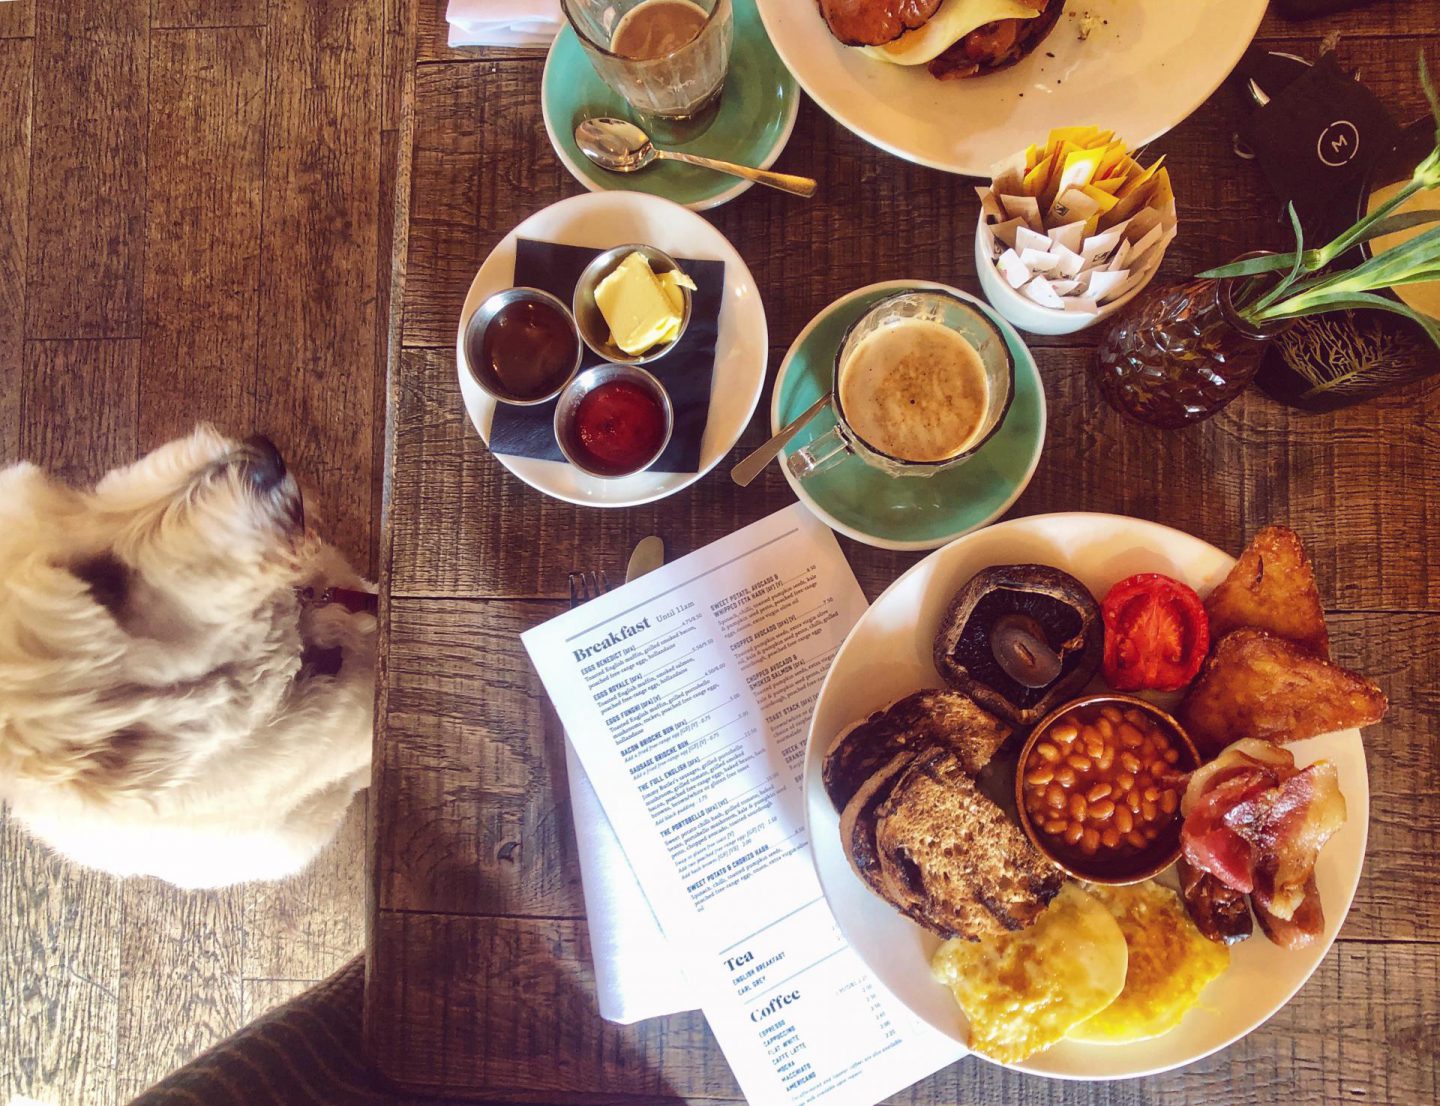 Doggie’s day out: Breakfast with a view at The Navigation Inn